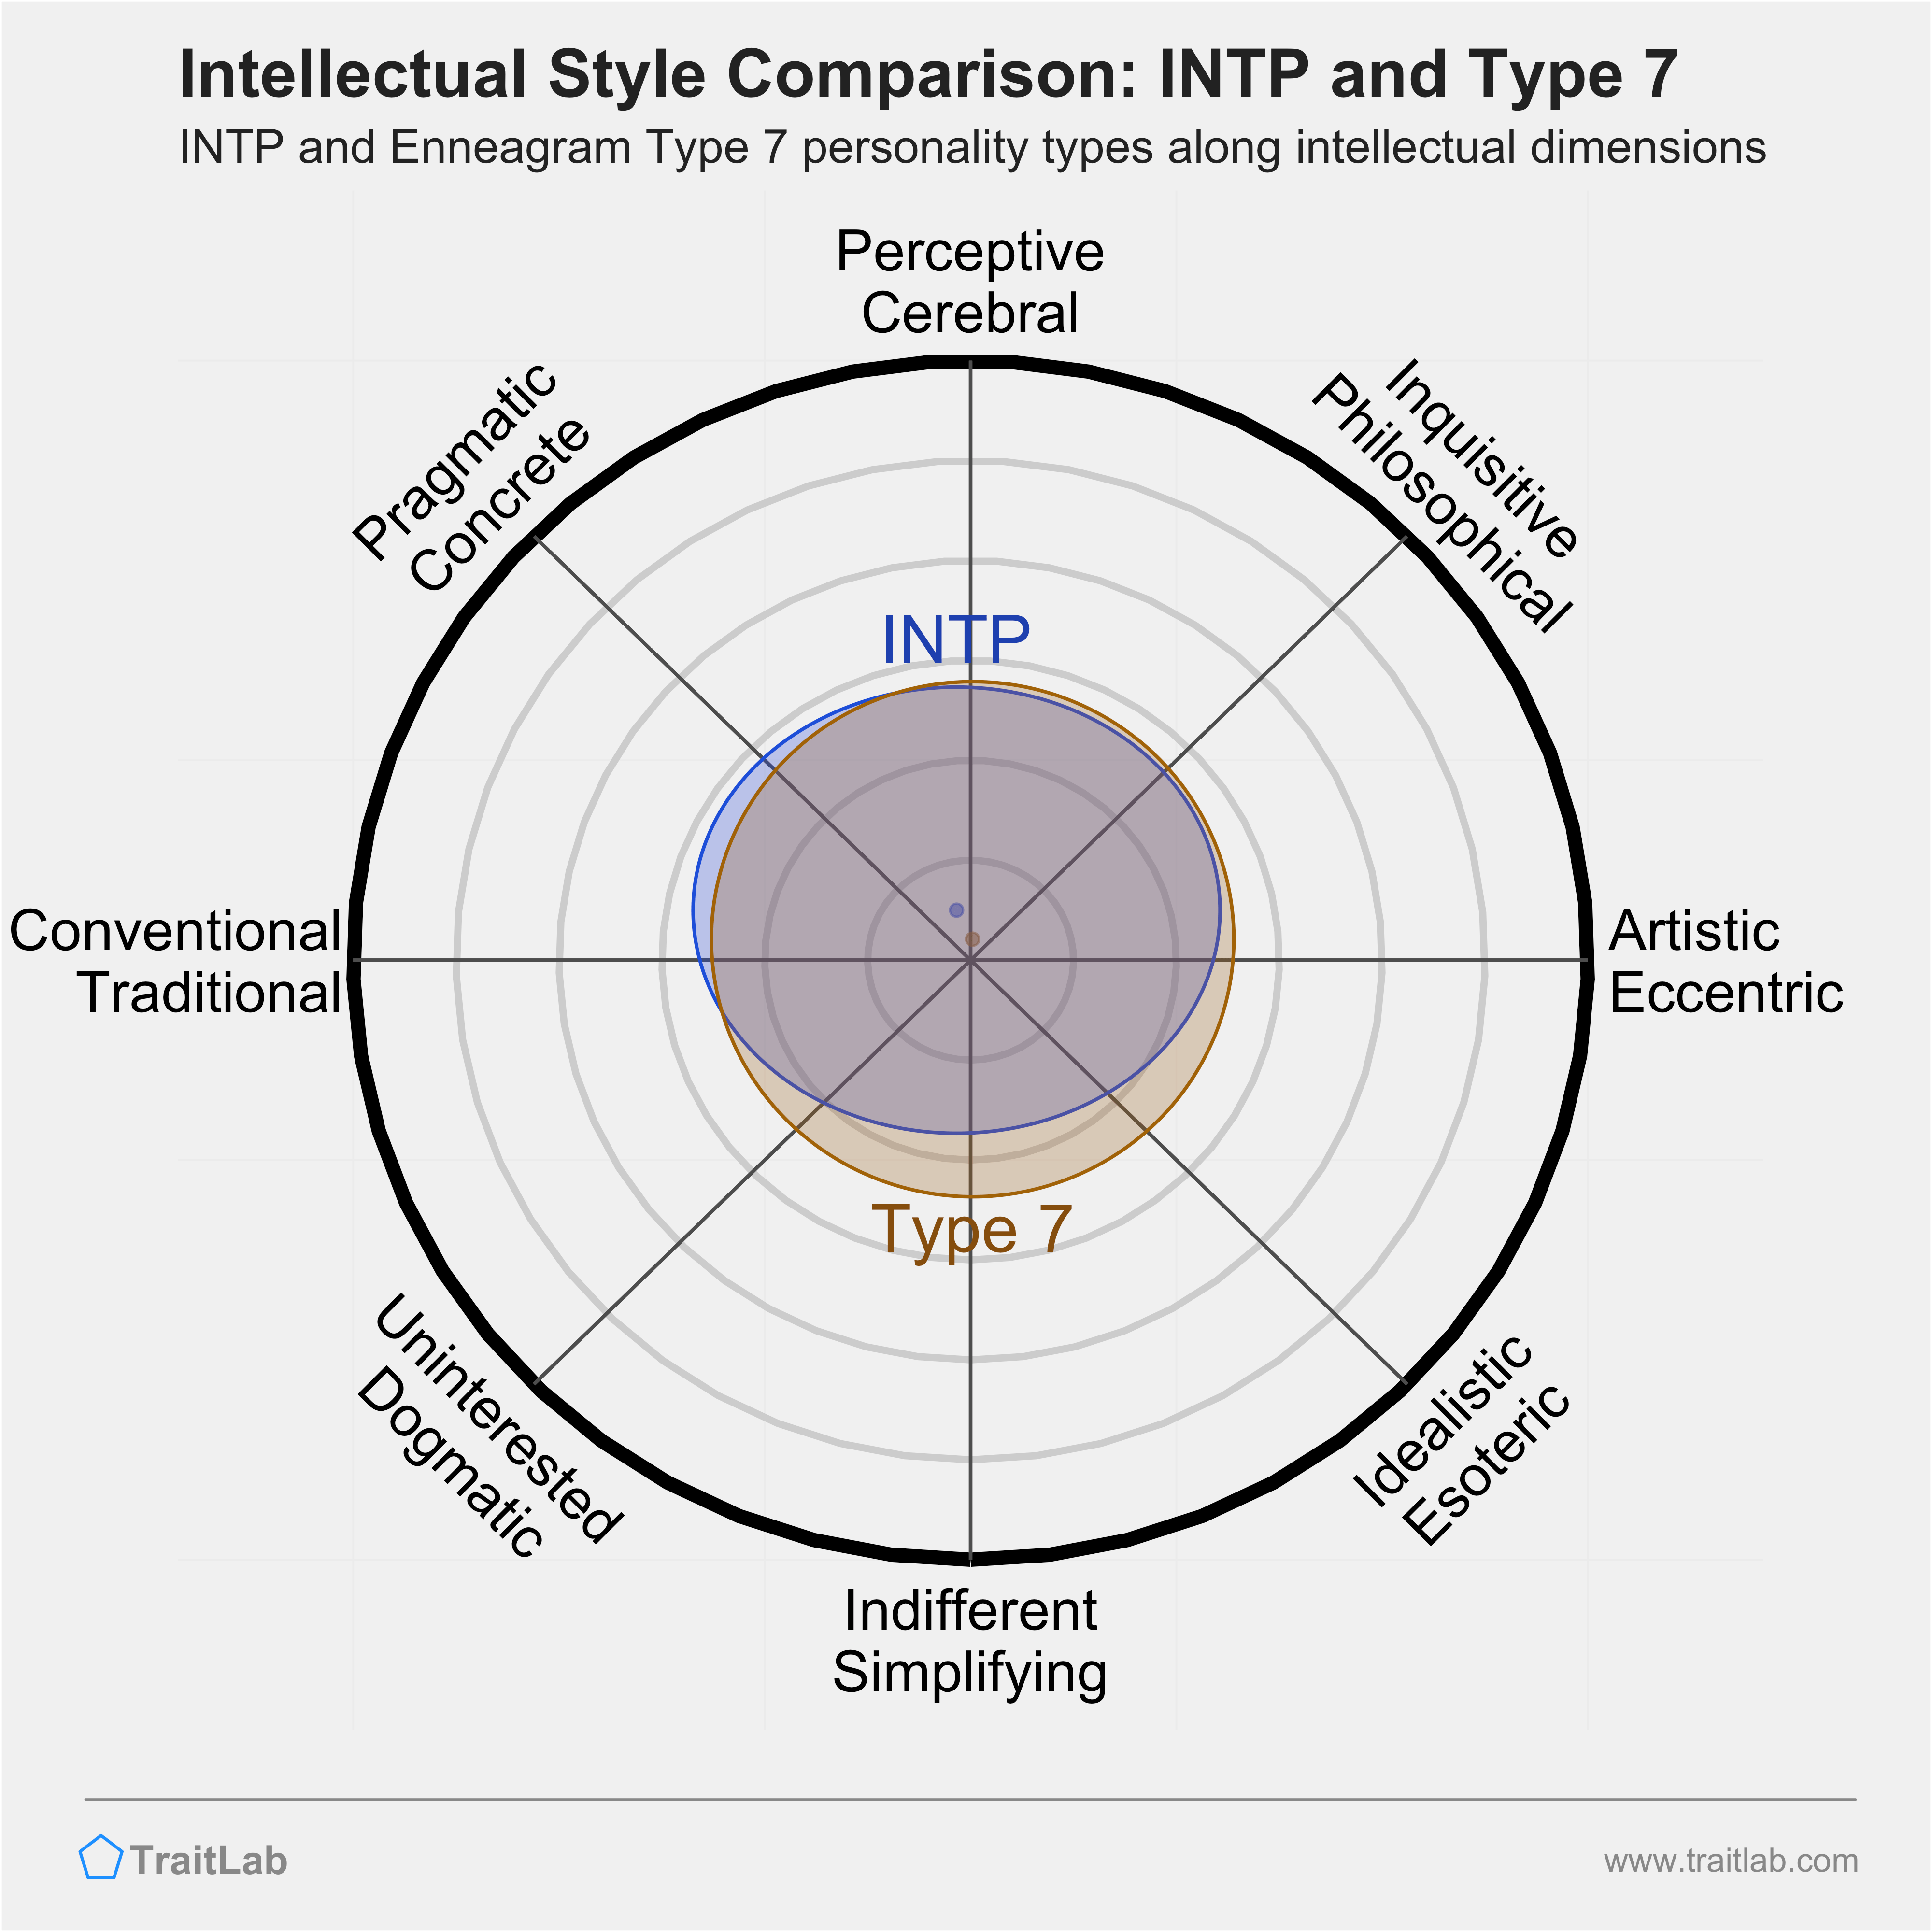 INTP and Type 7 comparison across intellectual dimensions